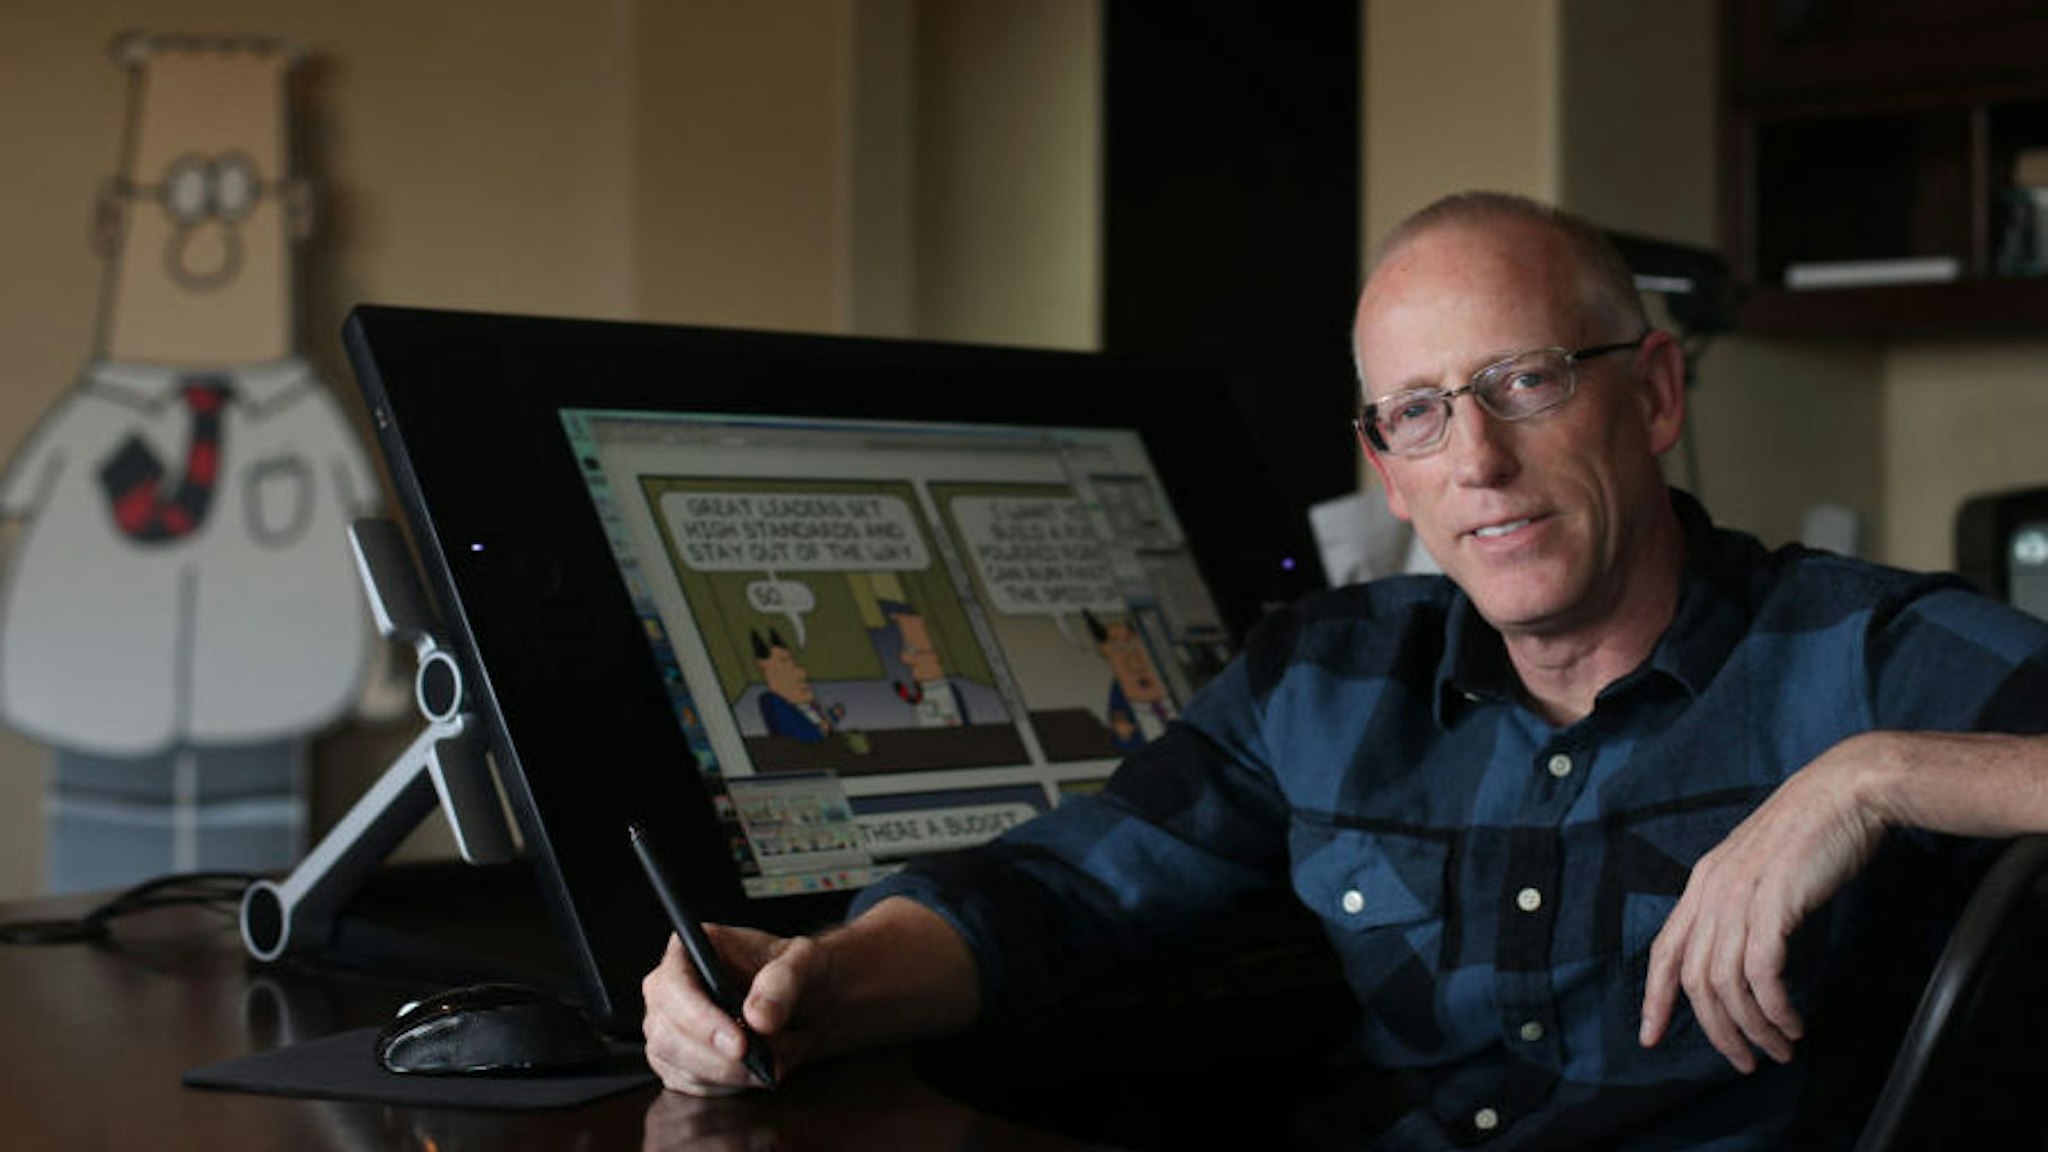 Scott Adams, cartoonist and author and creator of "Dilbert", poses for a portrait in his home office on Monday, January 6, 2014 in Pleasanton, Calif. Adams has published a new memoir "How to Fail at Almost Everything and Still Win Big: Kind of the Story of My Life".